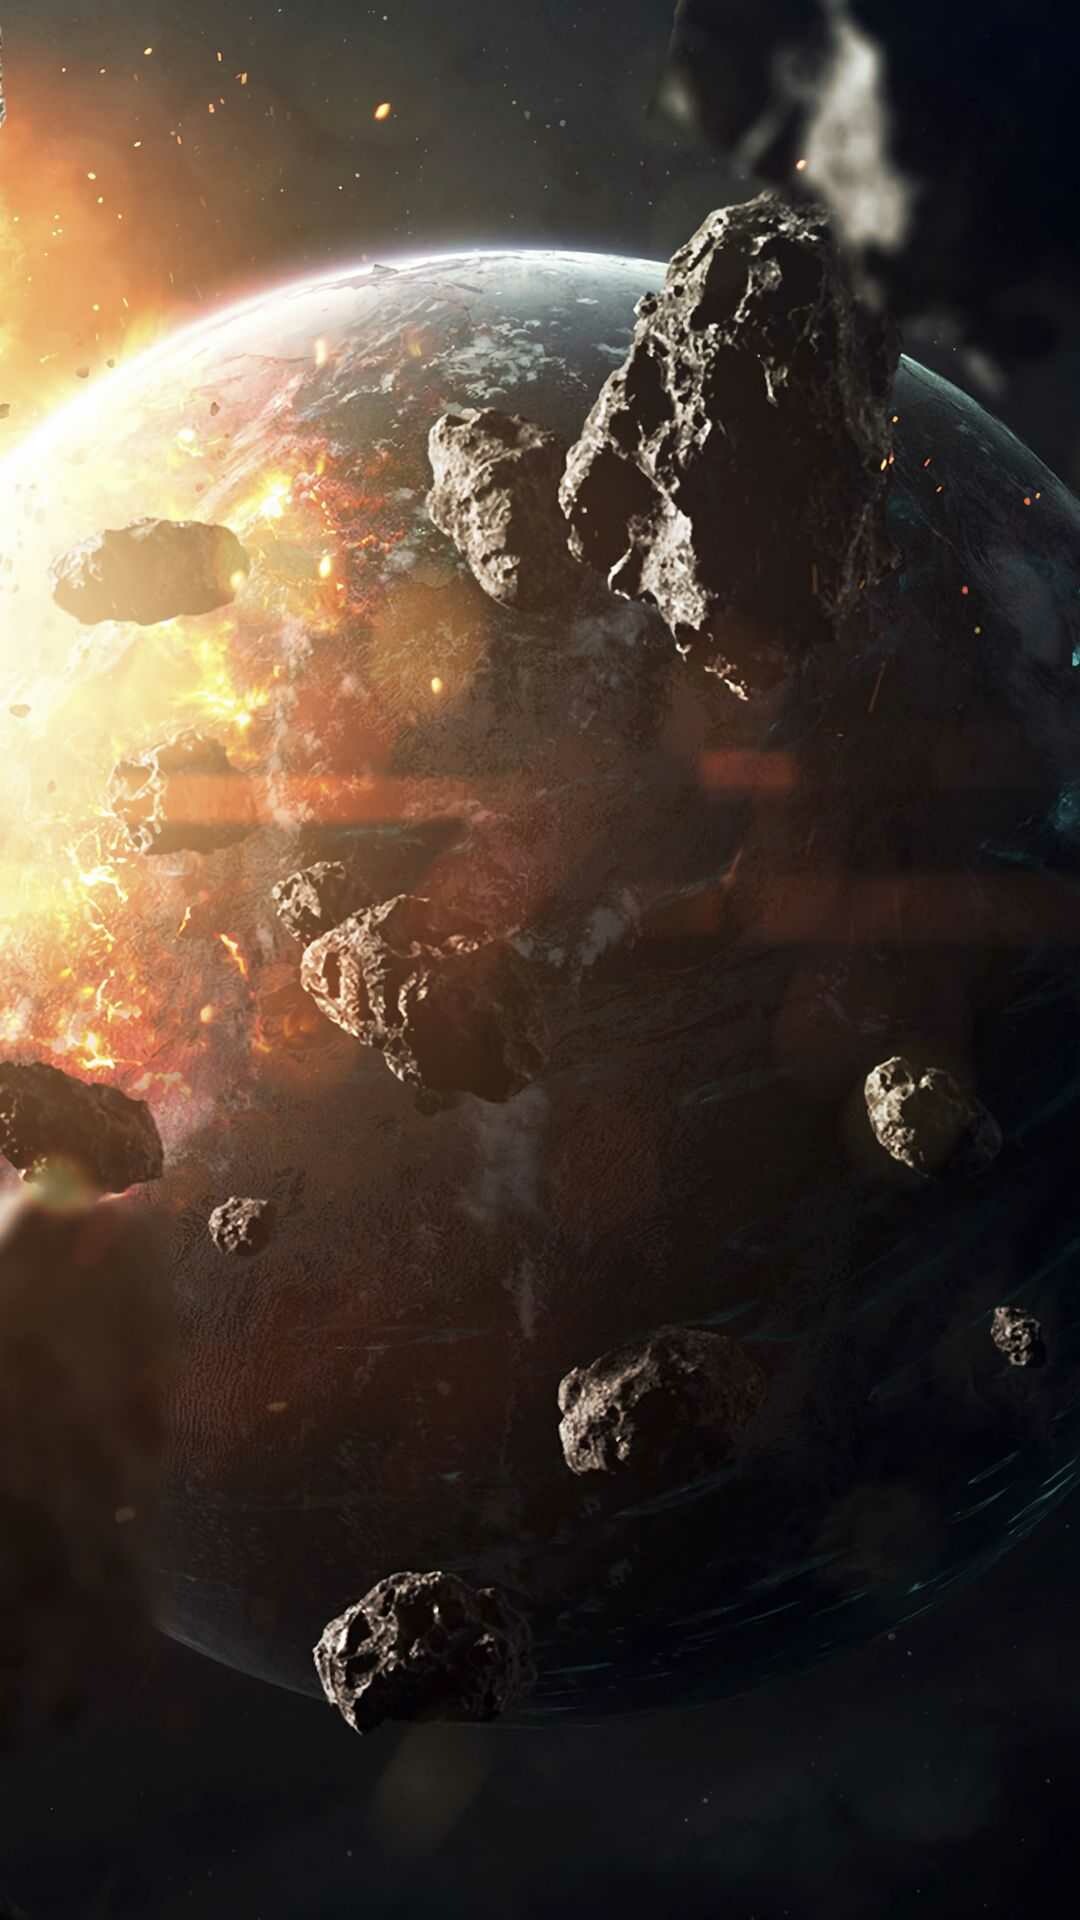 Meteor: Astronomical object, Fragments of rock or metal that fall to Earth from space, Meteorites. 1080x1920 Full HD Wallpaper.